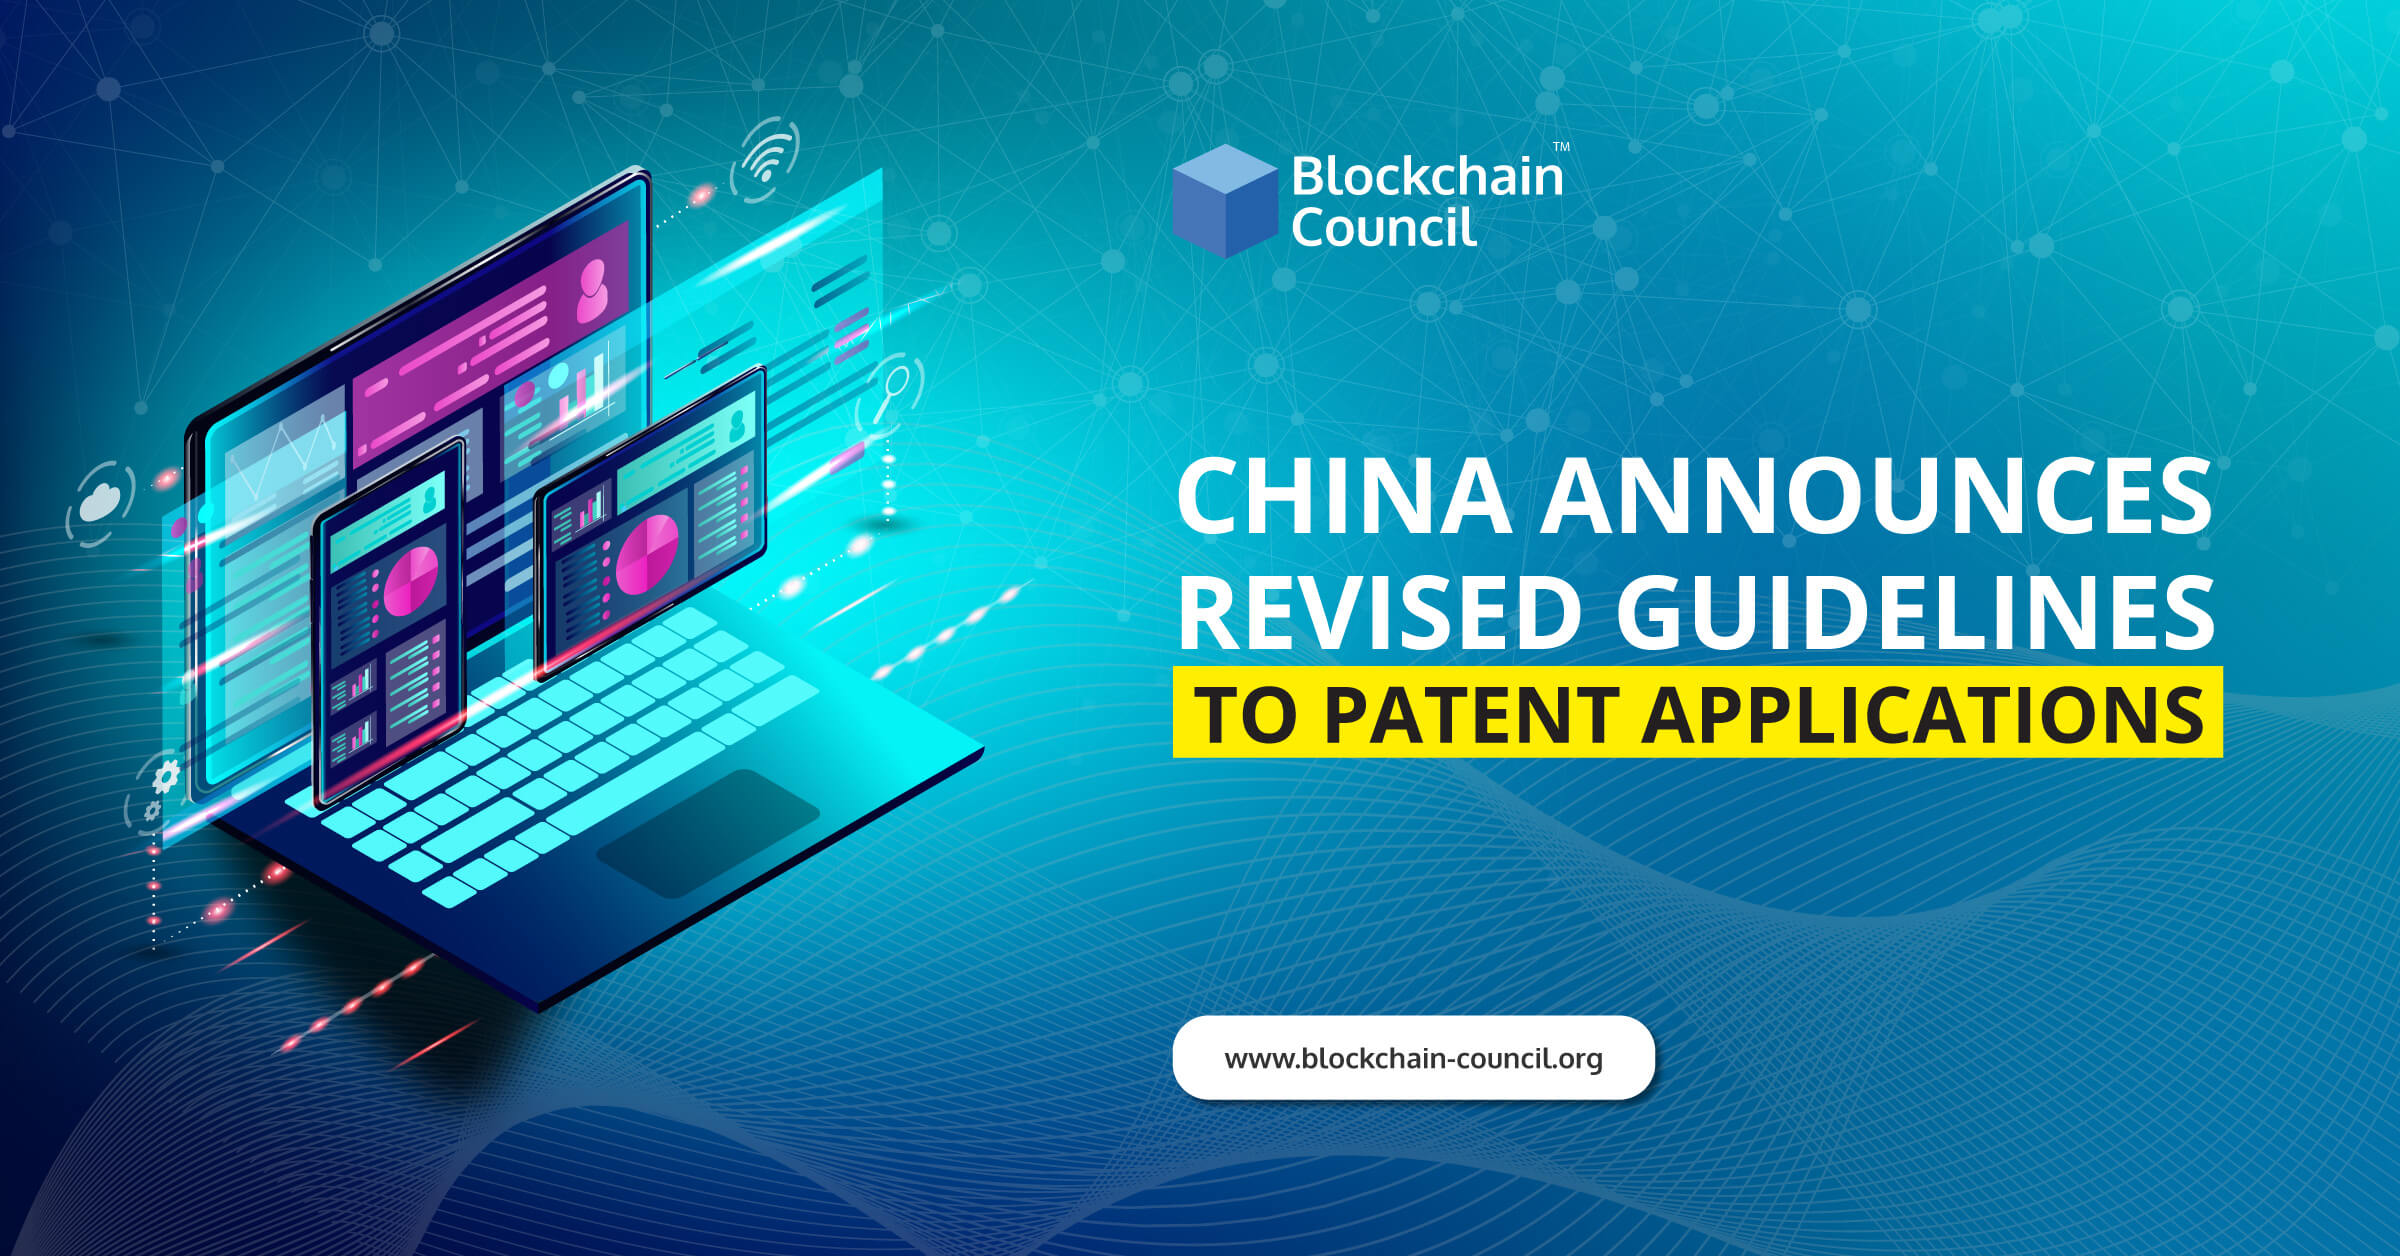 China Announces Revised Guidelines to Patent Applications